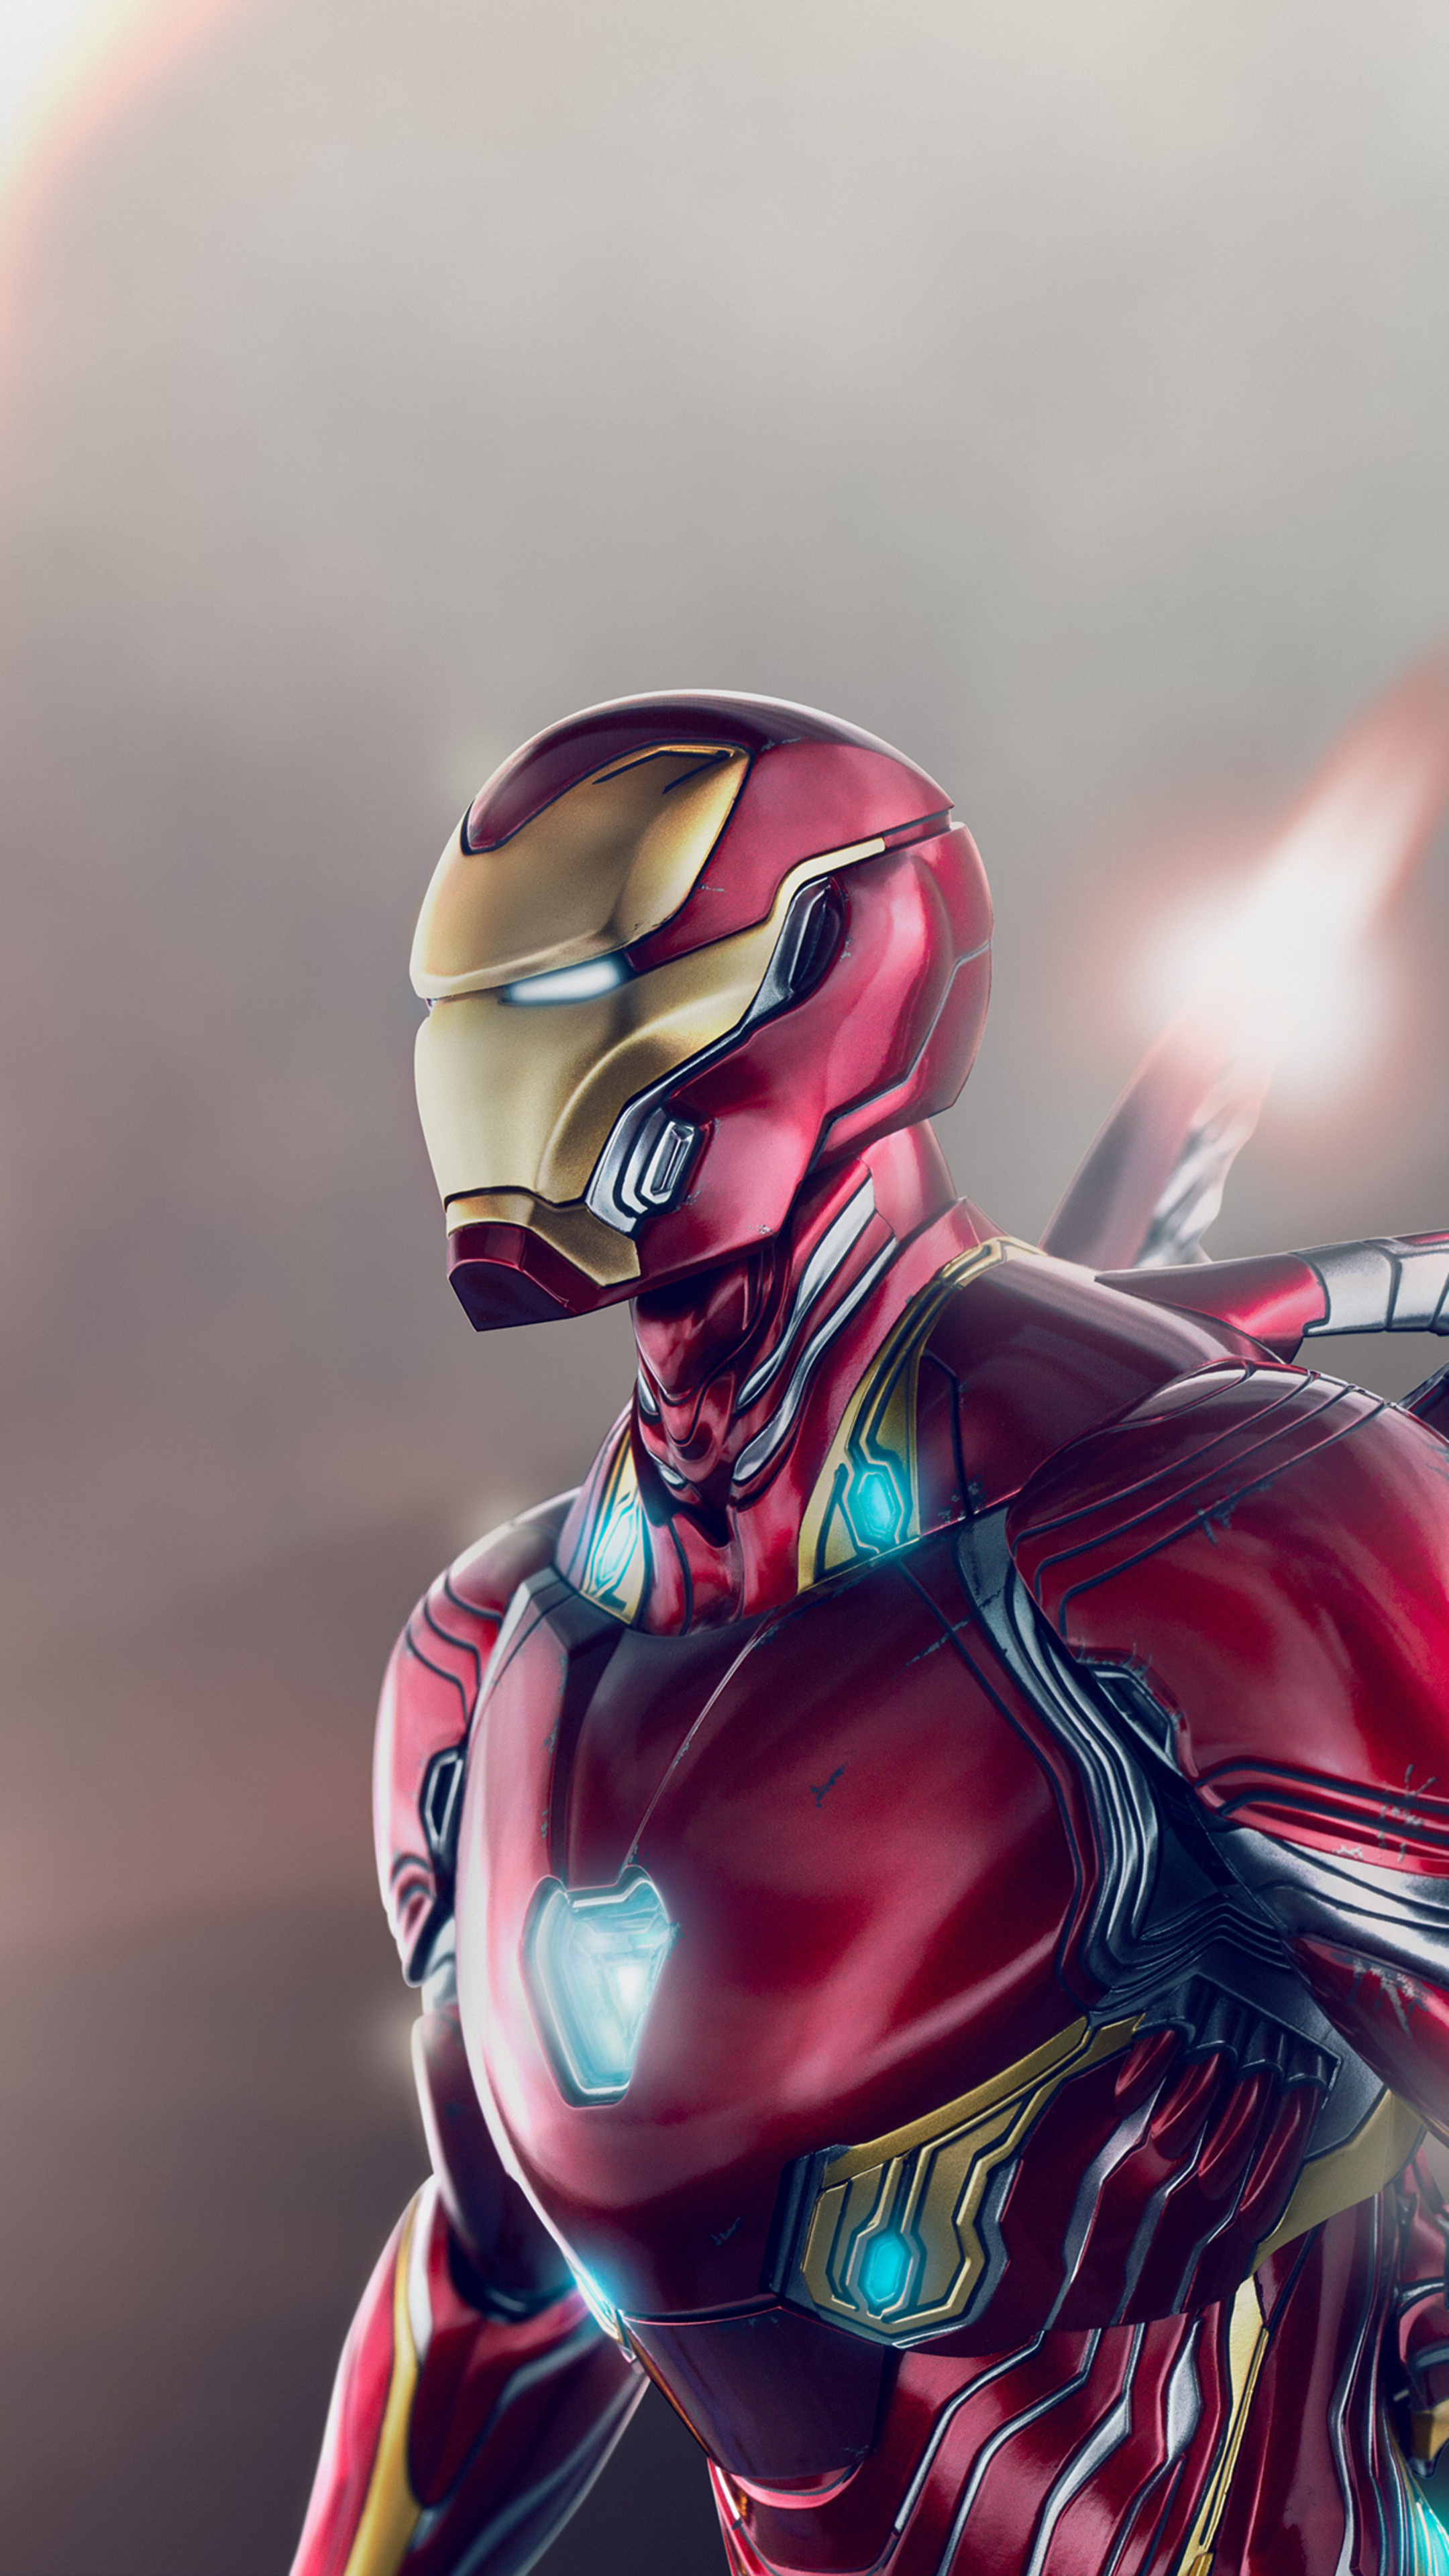 Iron Man Suit, Wing suit, Sony Xperia, Premium HD, 2160x3840 4K Phone